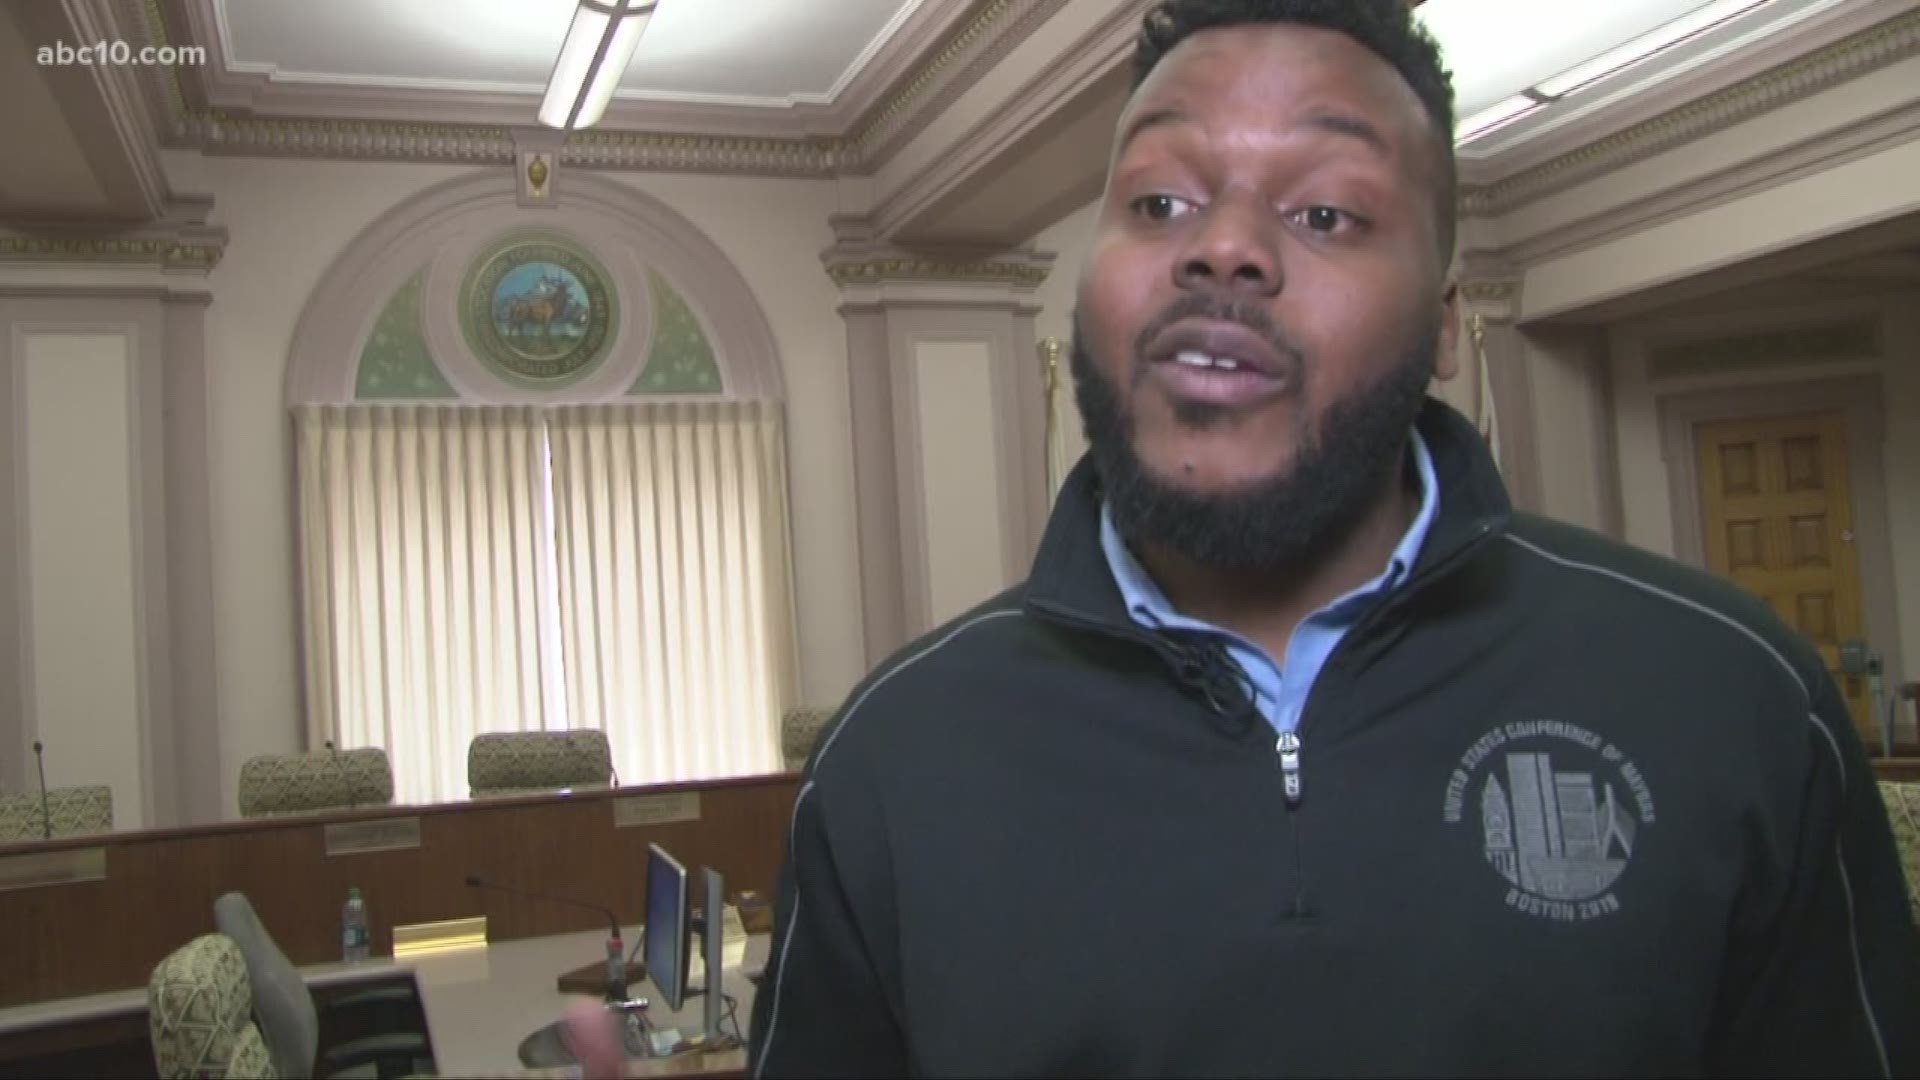 In a city with a bad reputation for crime, Stockton Mayor Michael Tubbs says the sudden surge in deadly shootings means more work needs to be done.